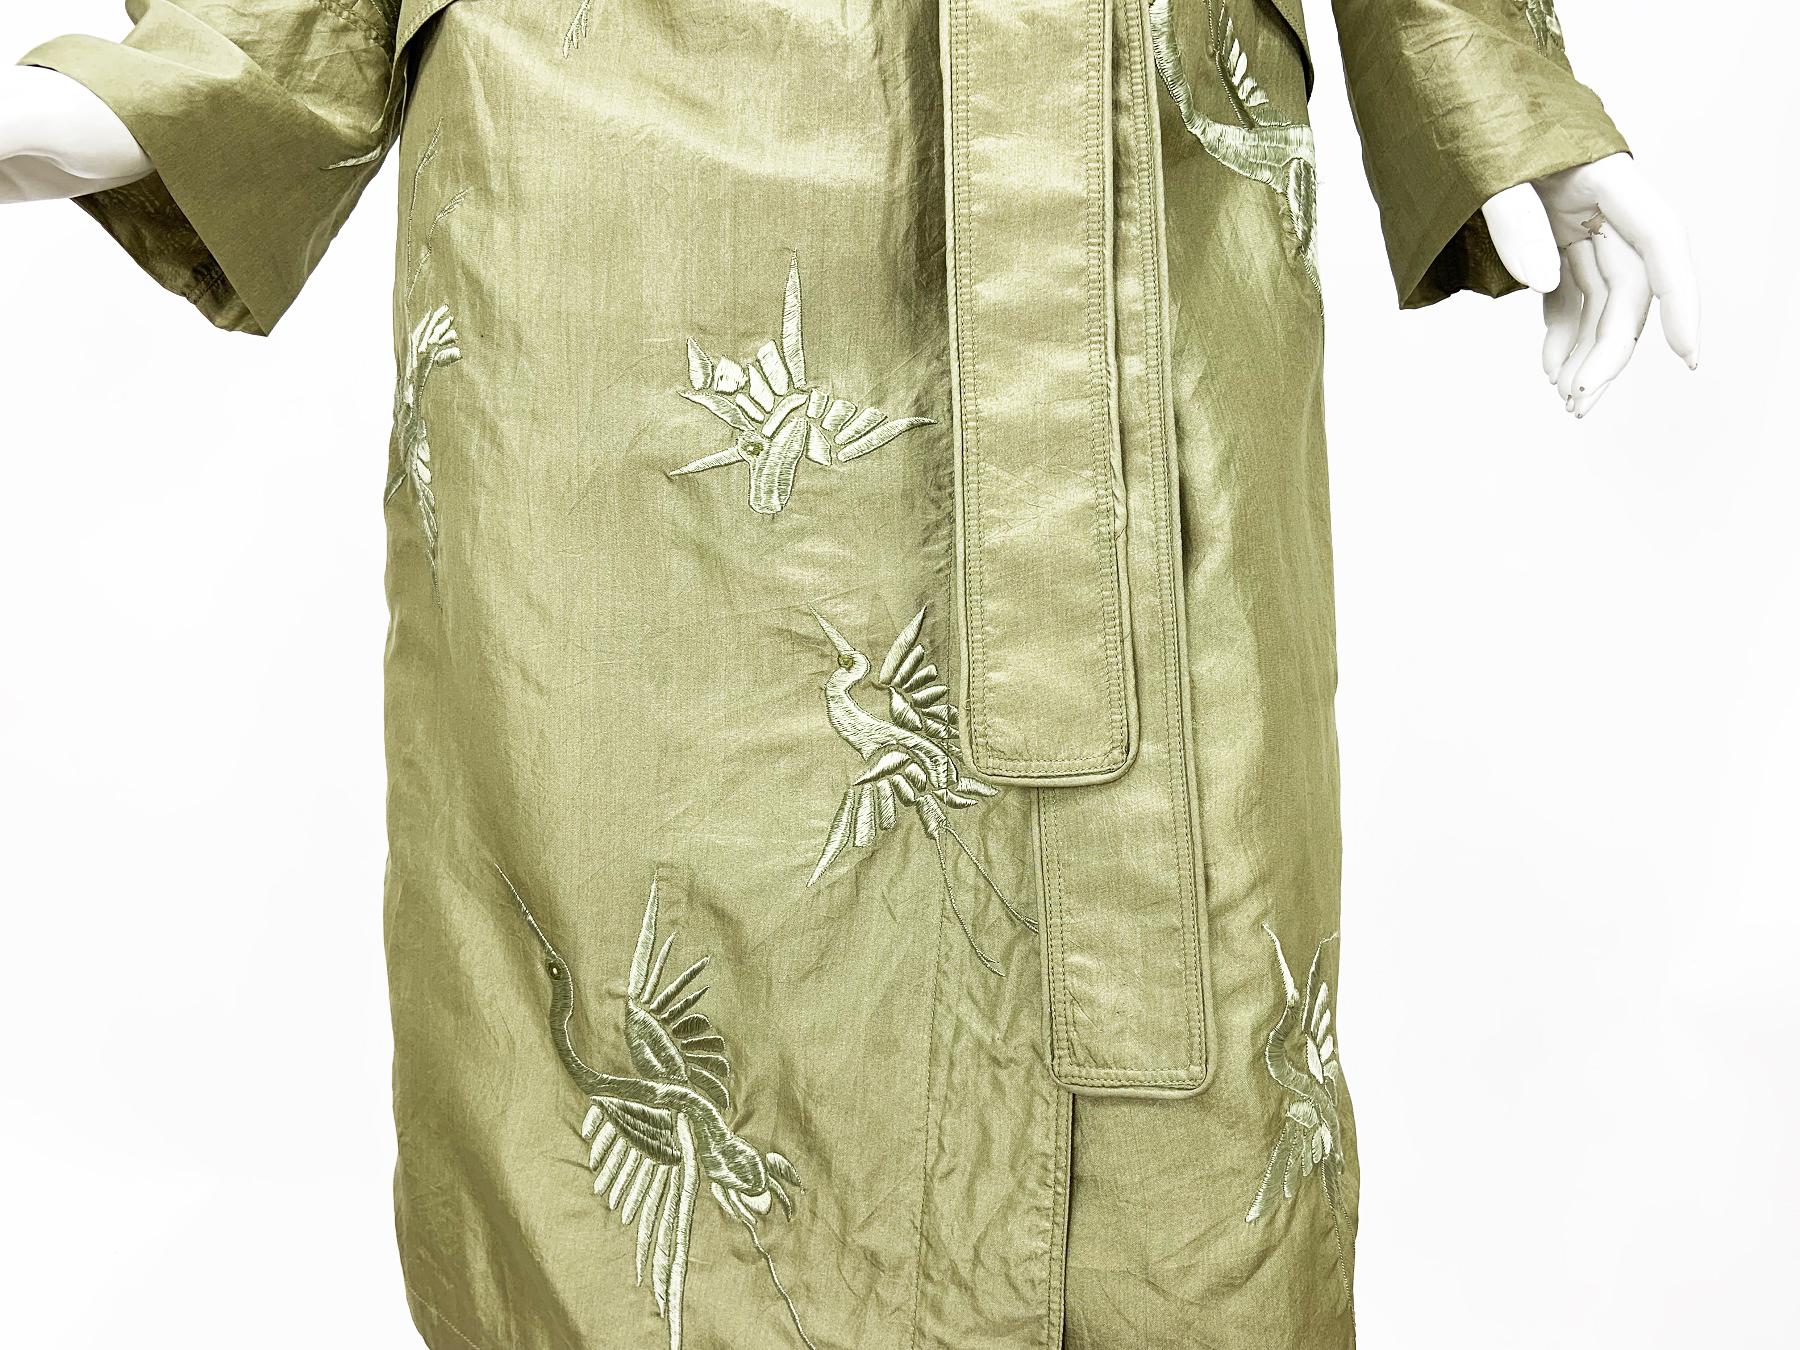 Tom Ford for Gucci S/S 2002 Green Silk Crane Birds Embroidery Trench Coat  For Sale 2